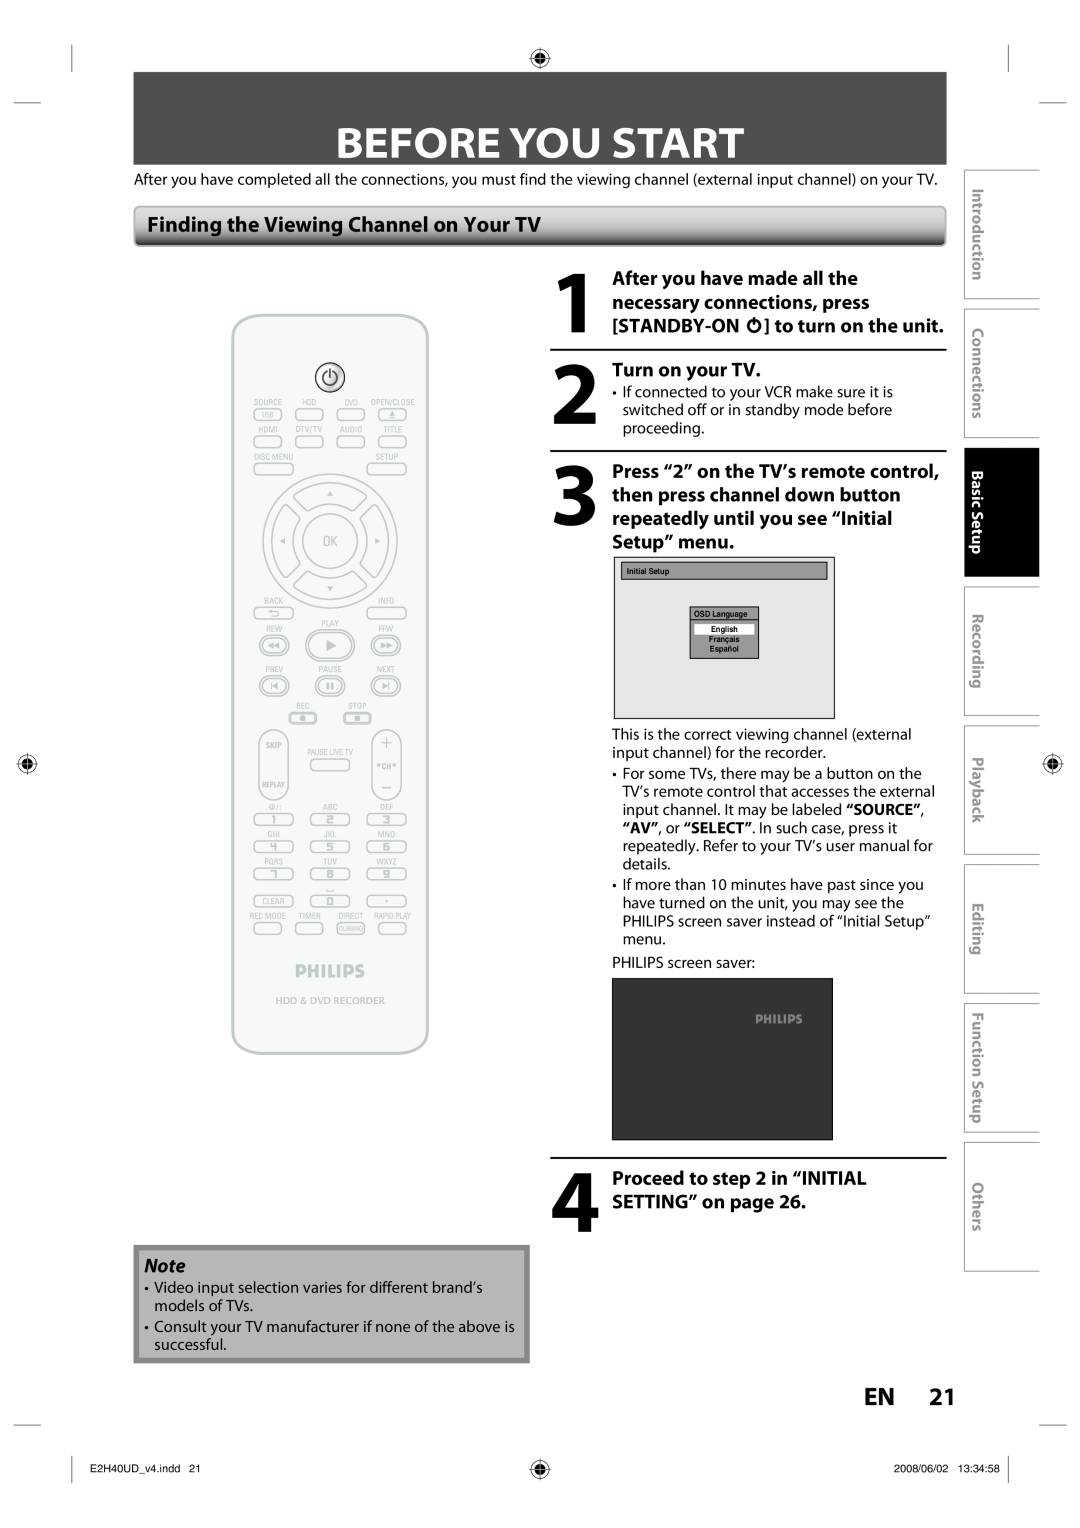 Philips DVDR3575H/37 manual Before You Start, Finding the Viewing Channel on Your TV, Turn on your TV, Others 